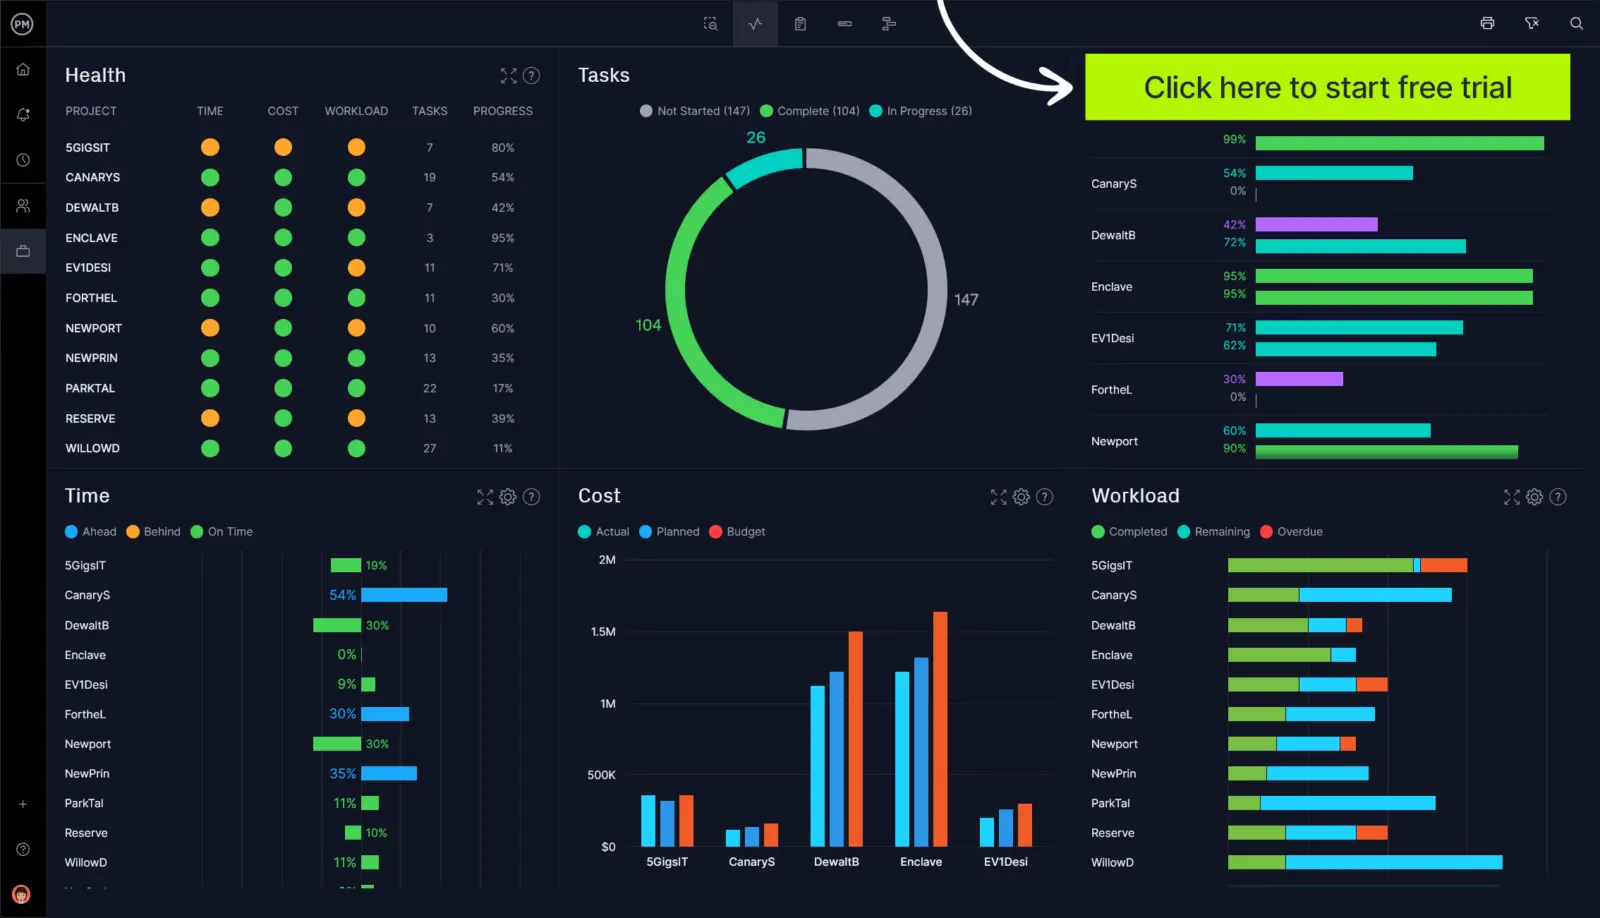 ProjectManager's real-time dashboard helps you track projects and overcome project management challenges